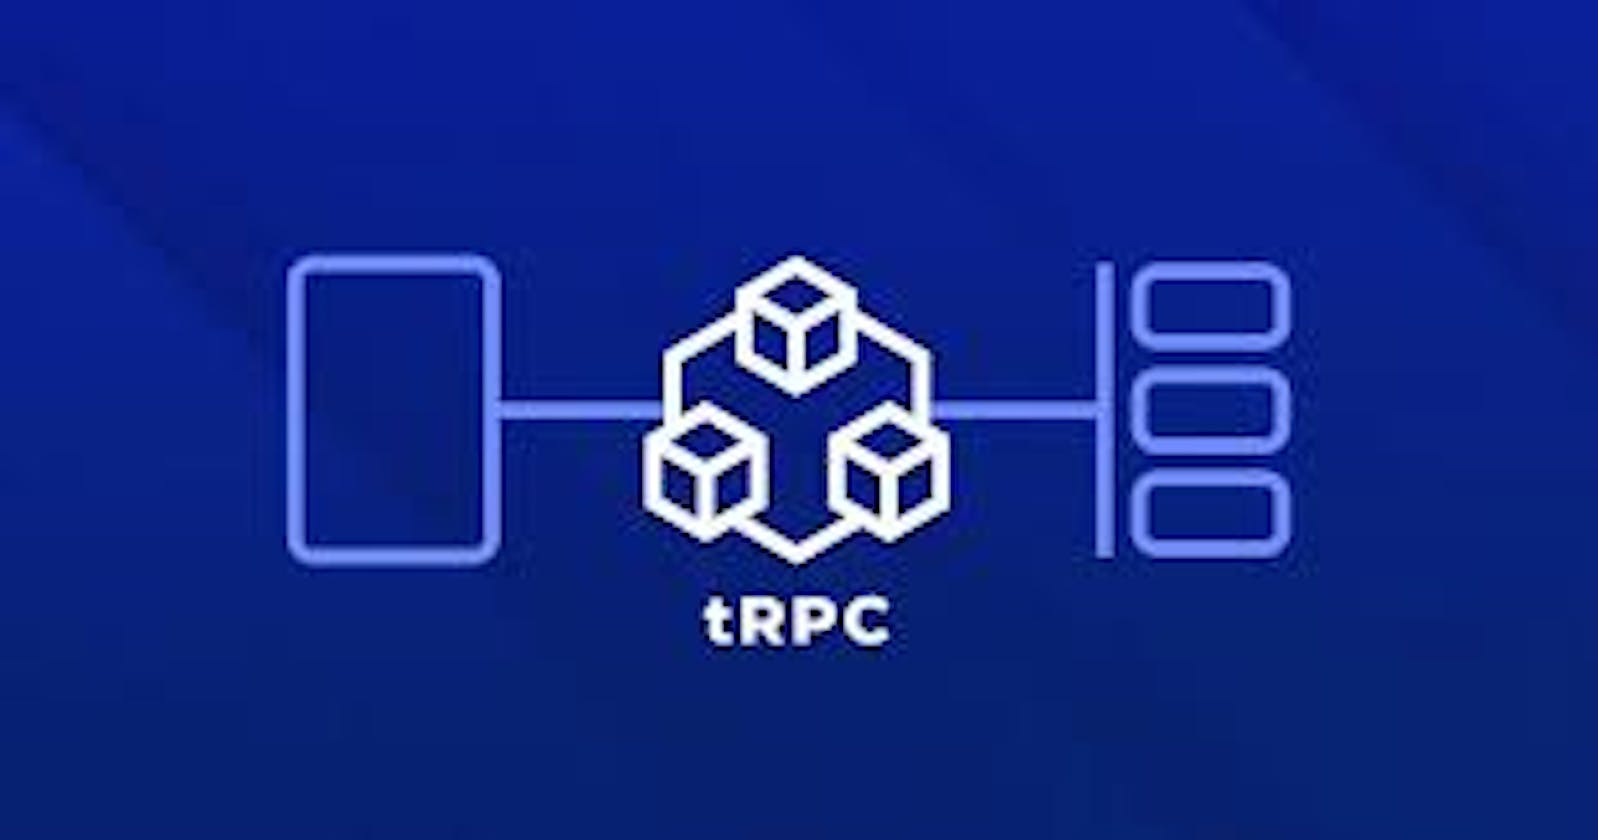 Getting started with tRPC